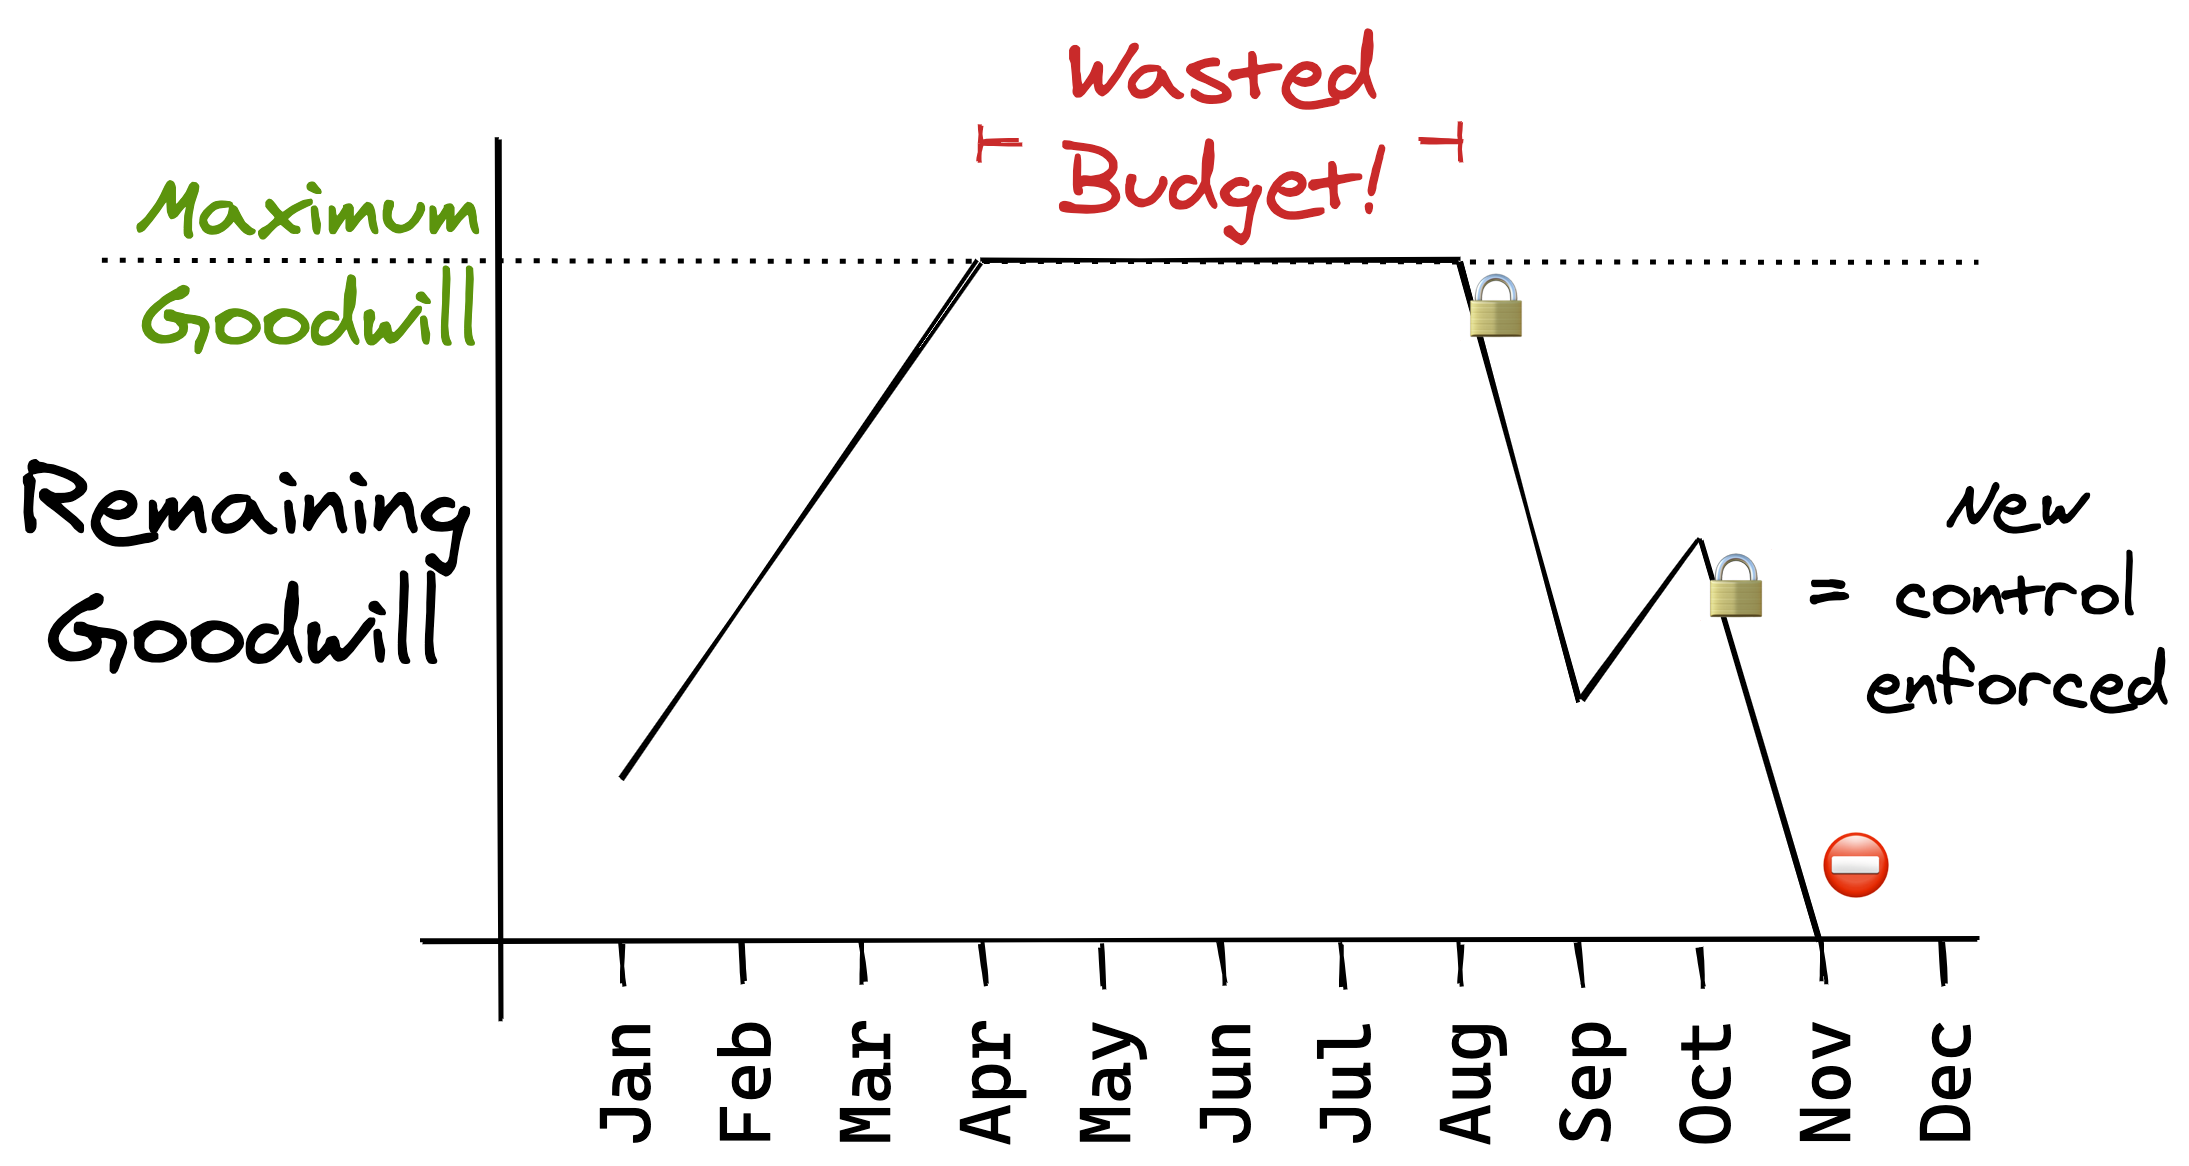 A graph of a hypothetical security goodwill budget throughout the year. From January to April it steadily increases, from April to August it plateaus, and from August onwards it decreases as two new security controls are enforced.